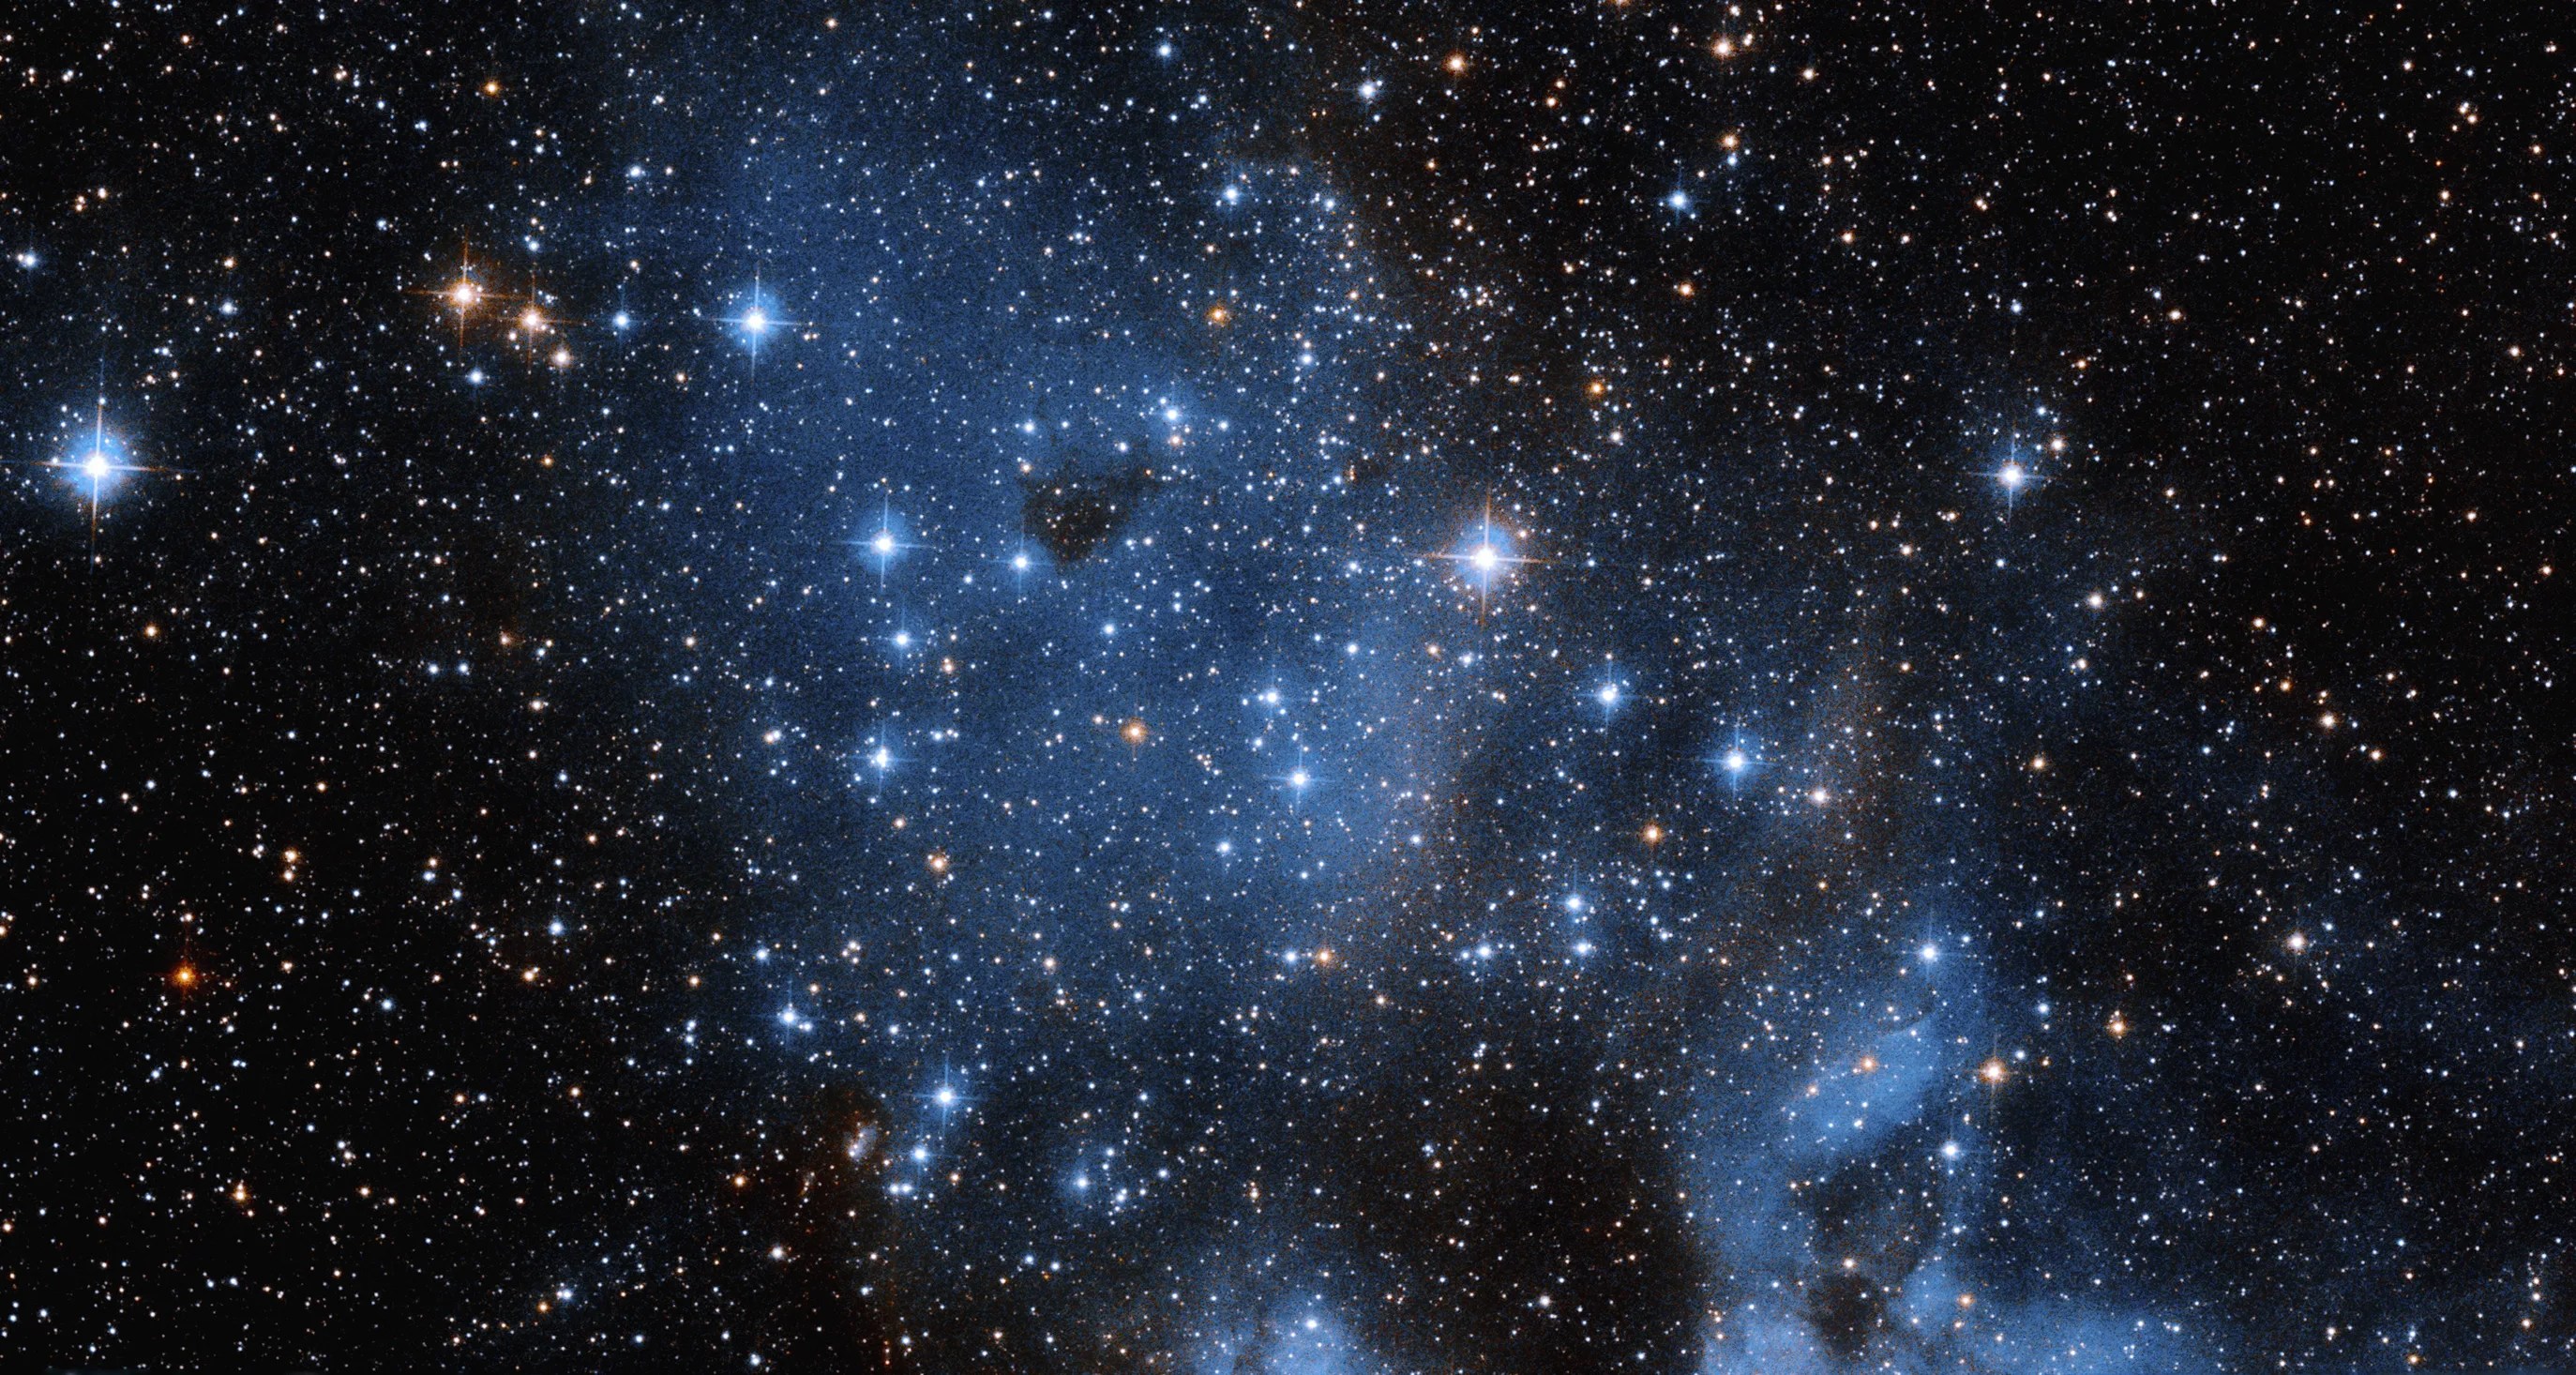 Bright, blue-white stars of varying sizes fil the scene. a smattering of orange-white stars dotted throughout. a swath of pale-blue gas and dust extends from upper left to lower right across the image.